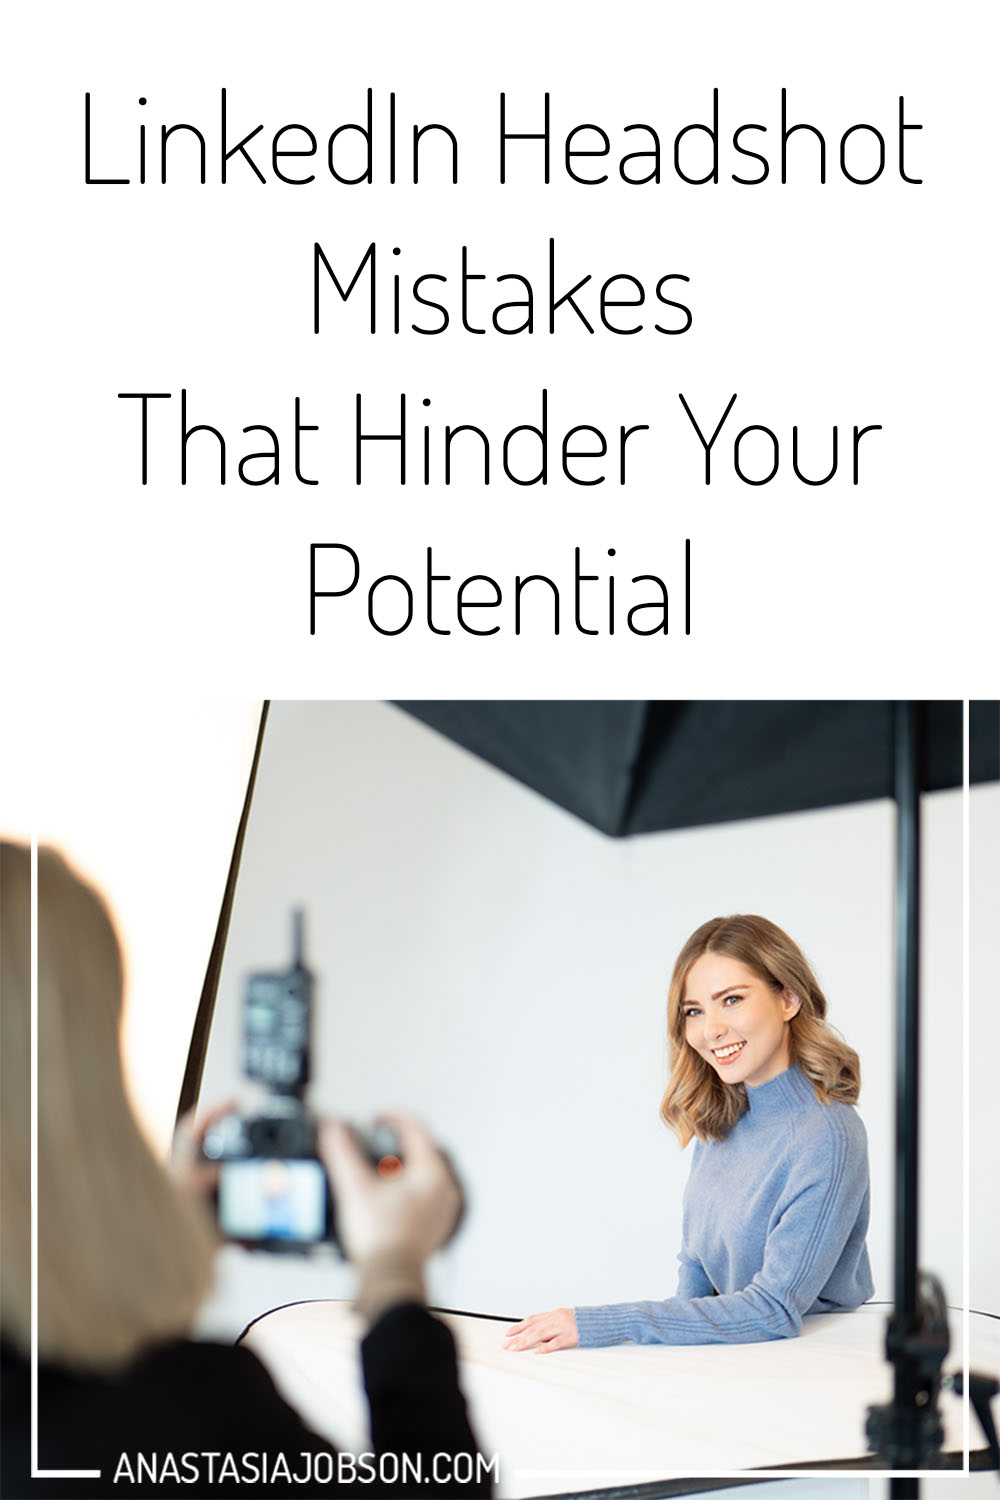 LinkedIn Headshot mistakes that hinder your potential